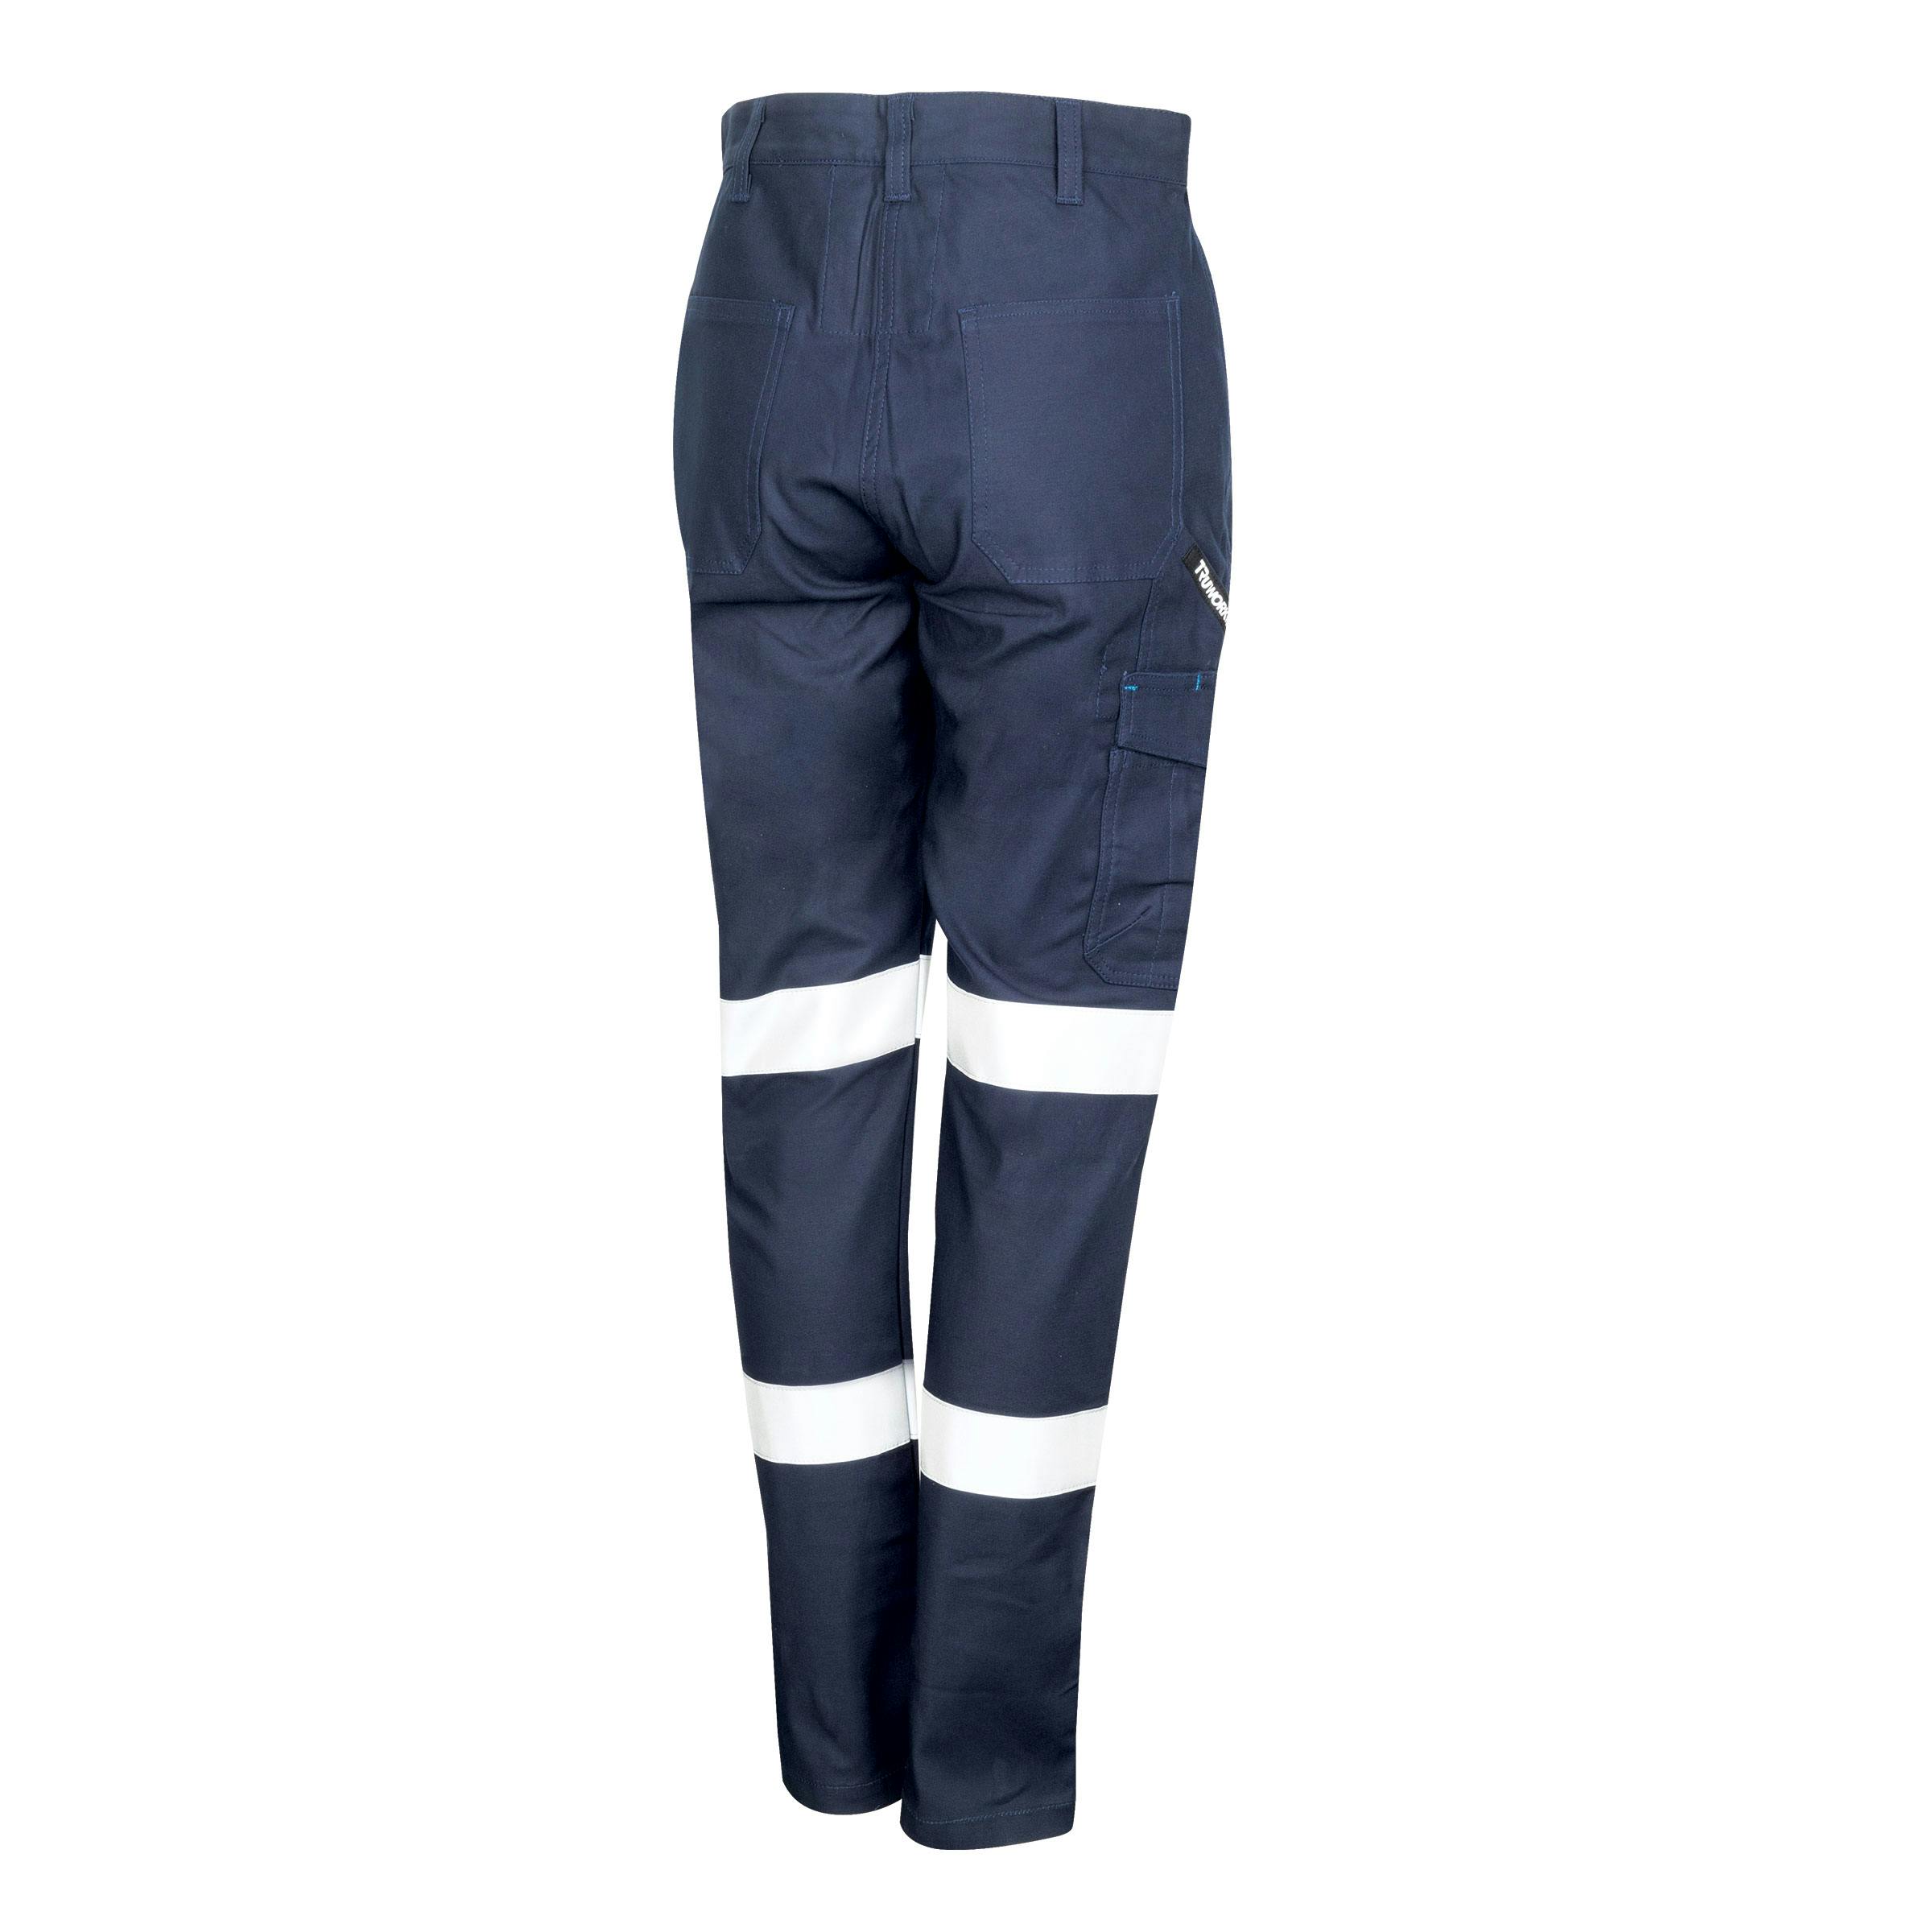 TRu Workwear Women'S Trousers Cargo 240 gsm 98/2 Cotton Stretch With Stretch Reflective Tape As 2 Hoops On Each Leg_1